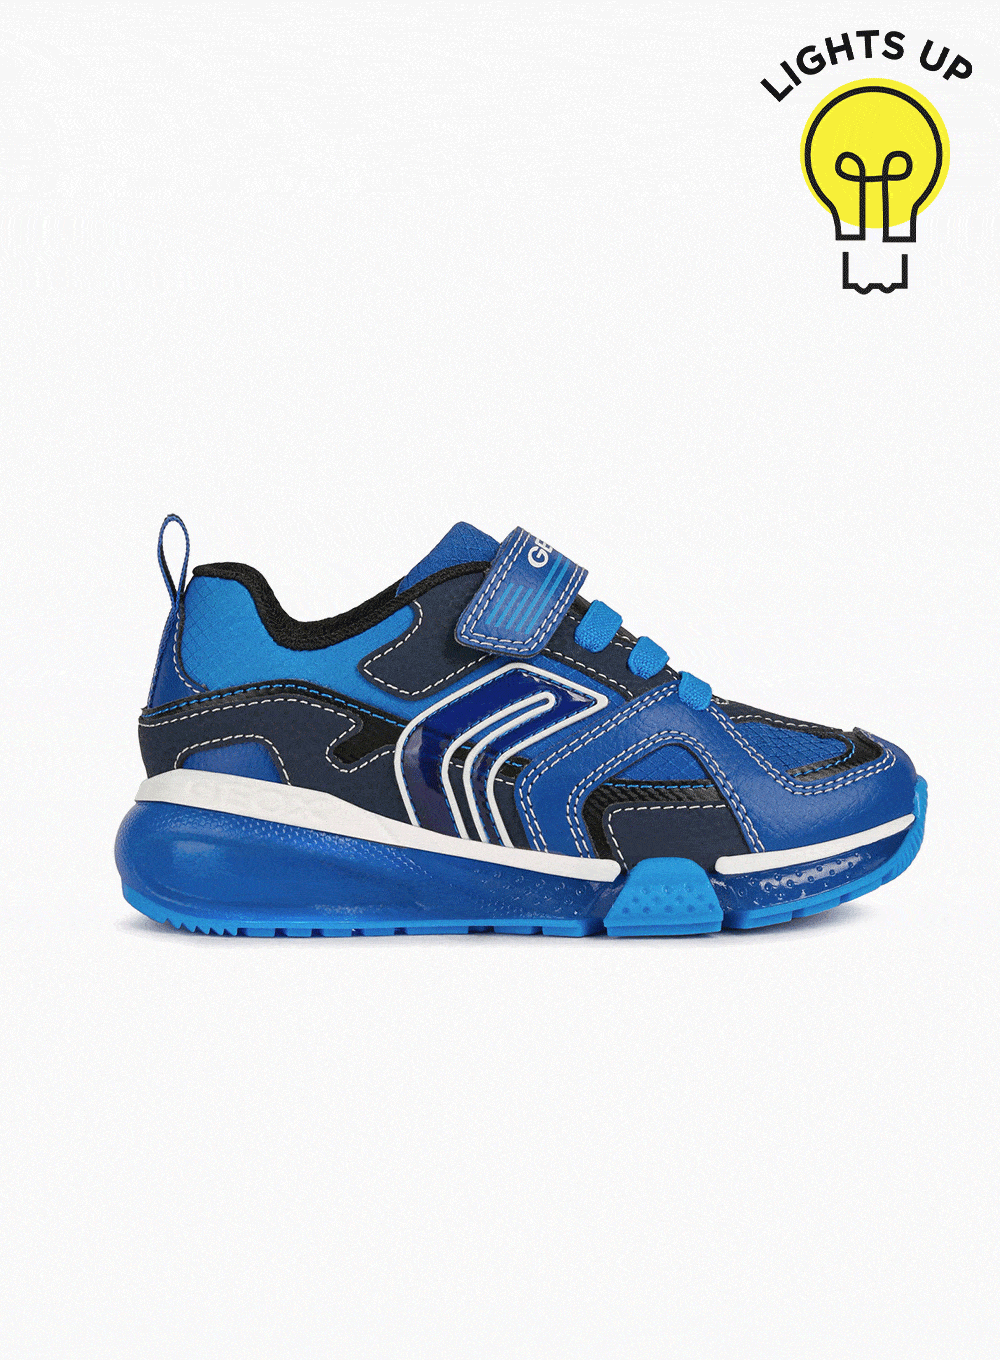 cooperar Seguid así Volcánico Geox Bayonyc Light-Up Trainers in Royal Blue | Trotters Childrenswear